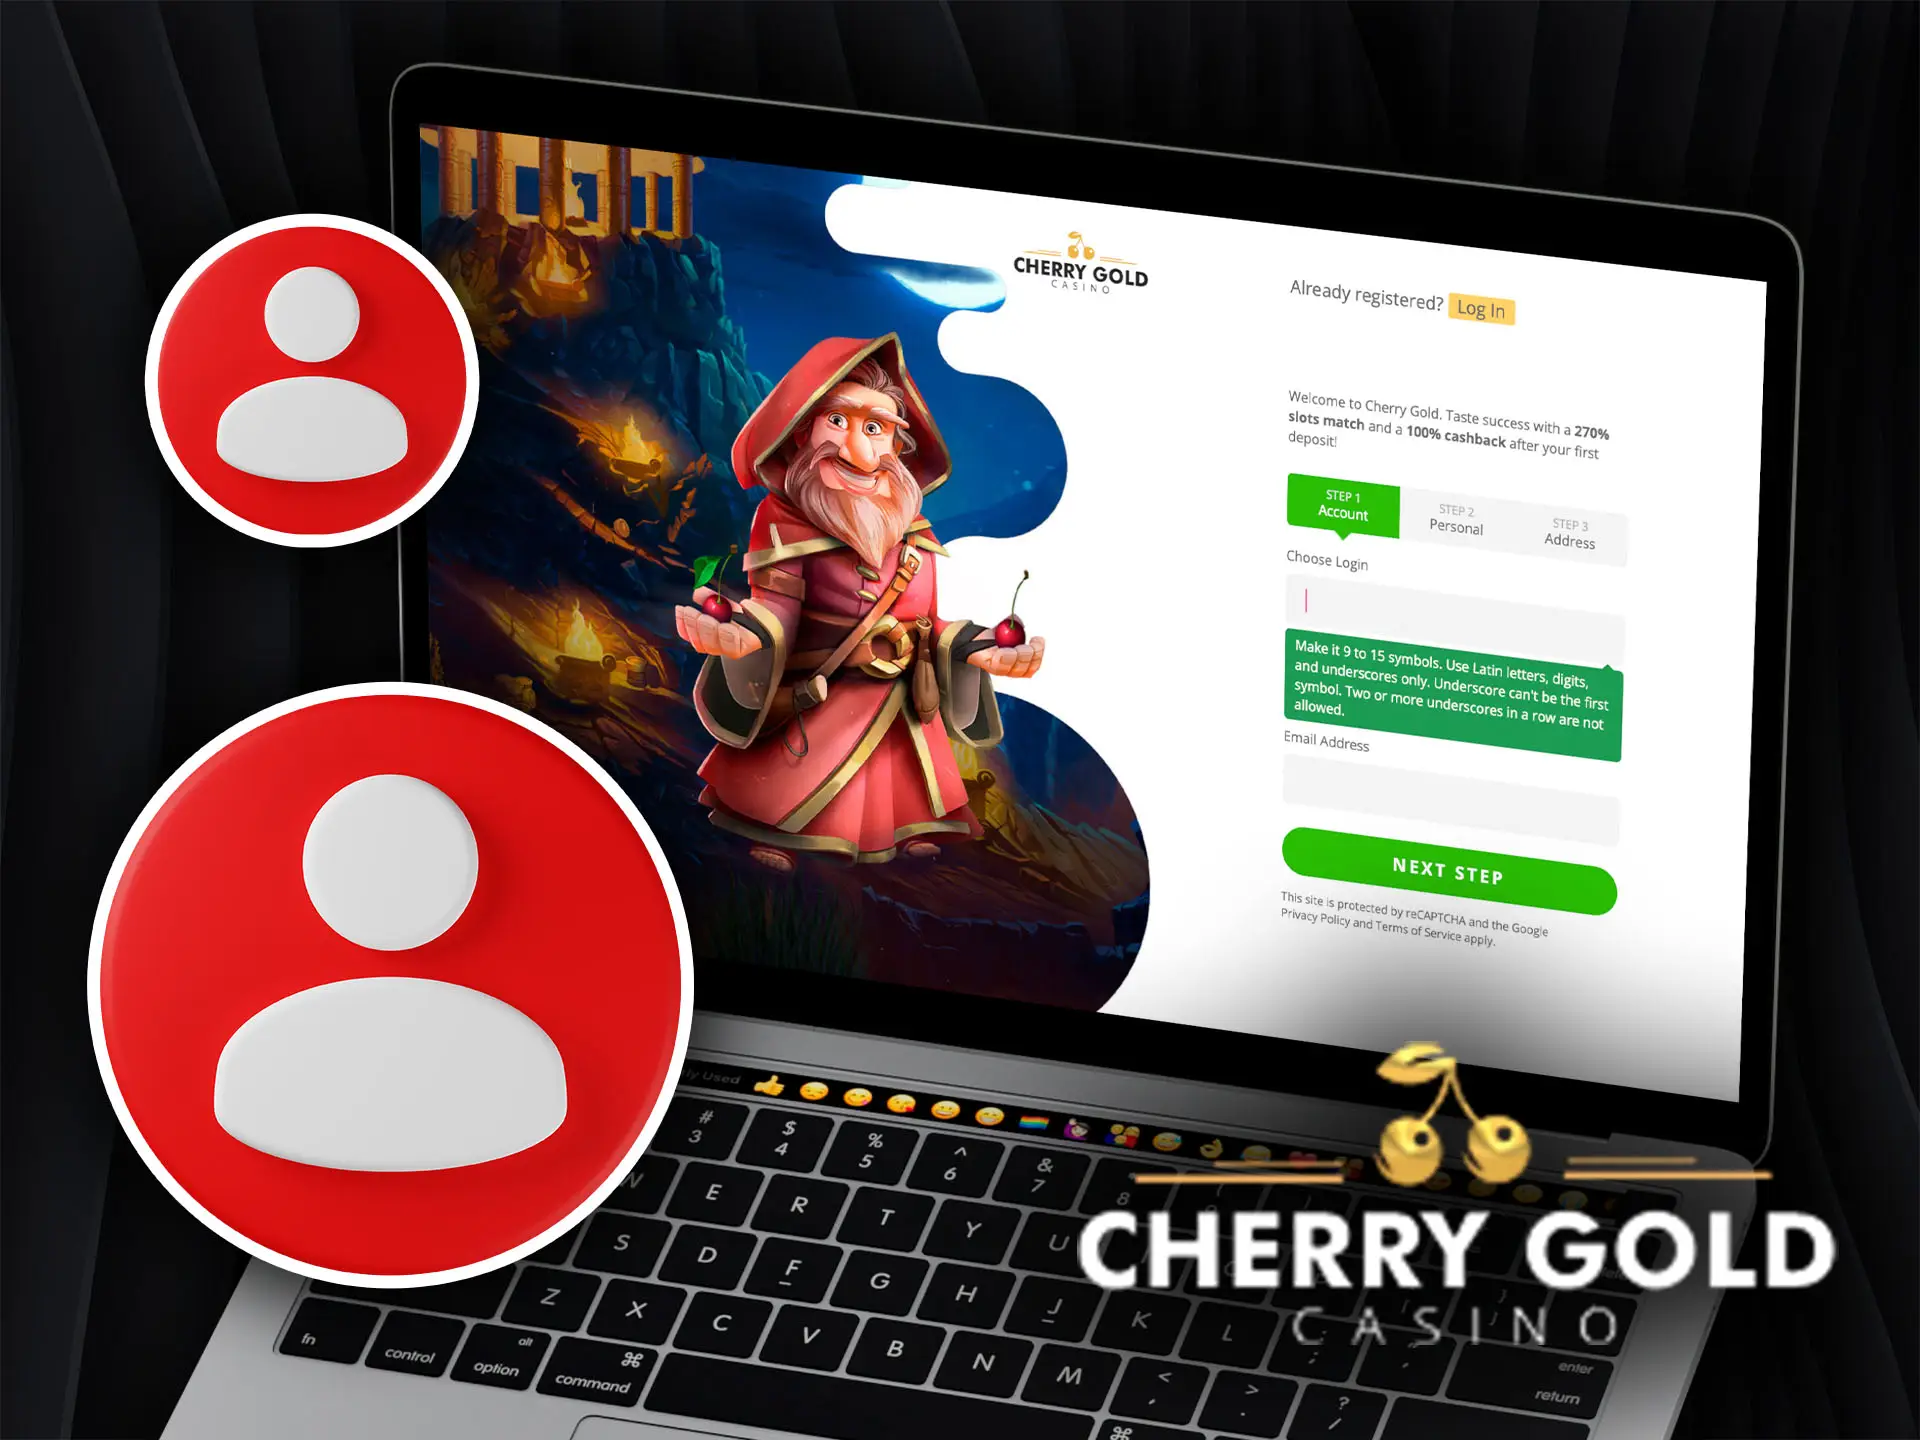 How to register at Cherry Gold Casino.